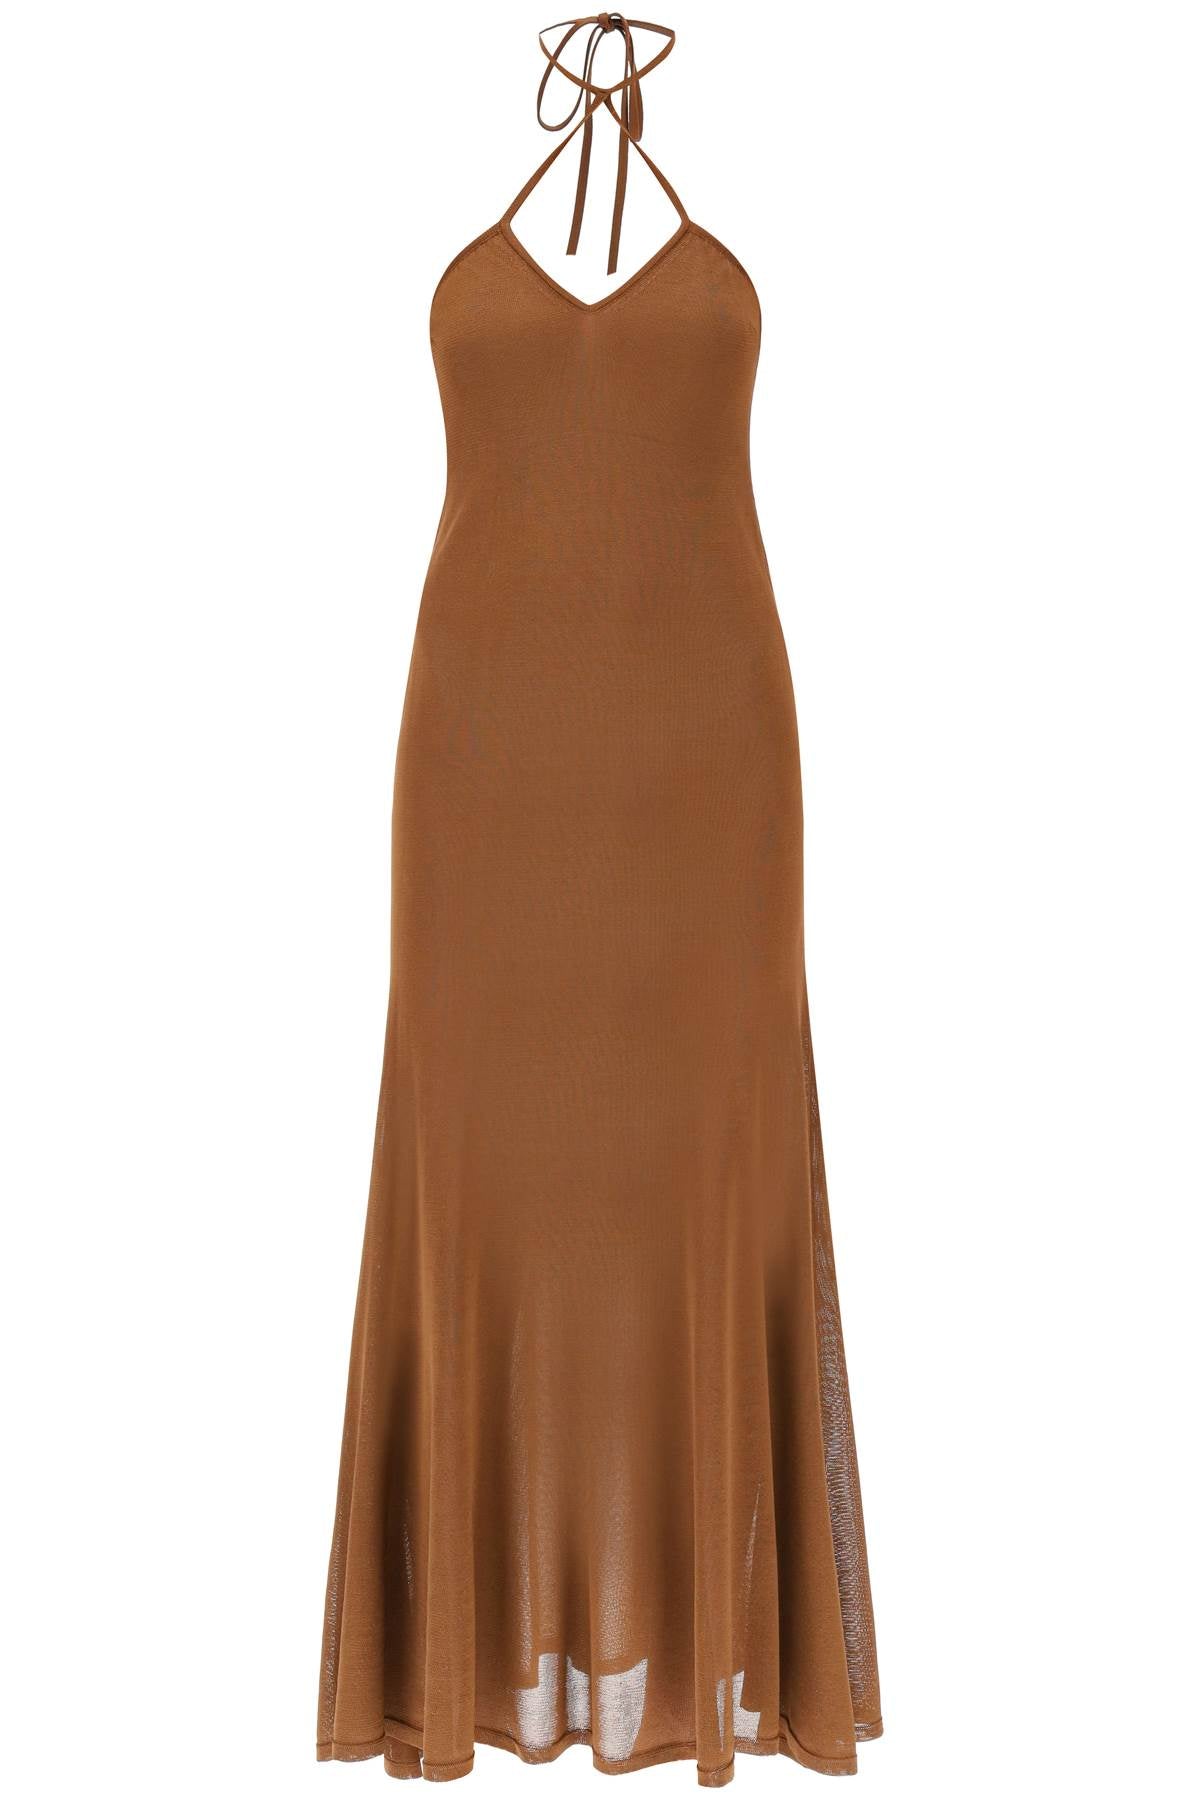 Tom Ford Stylish Knit Halter Maxi Dress For Women In Brown